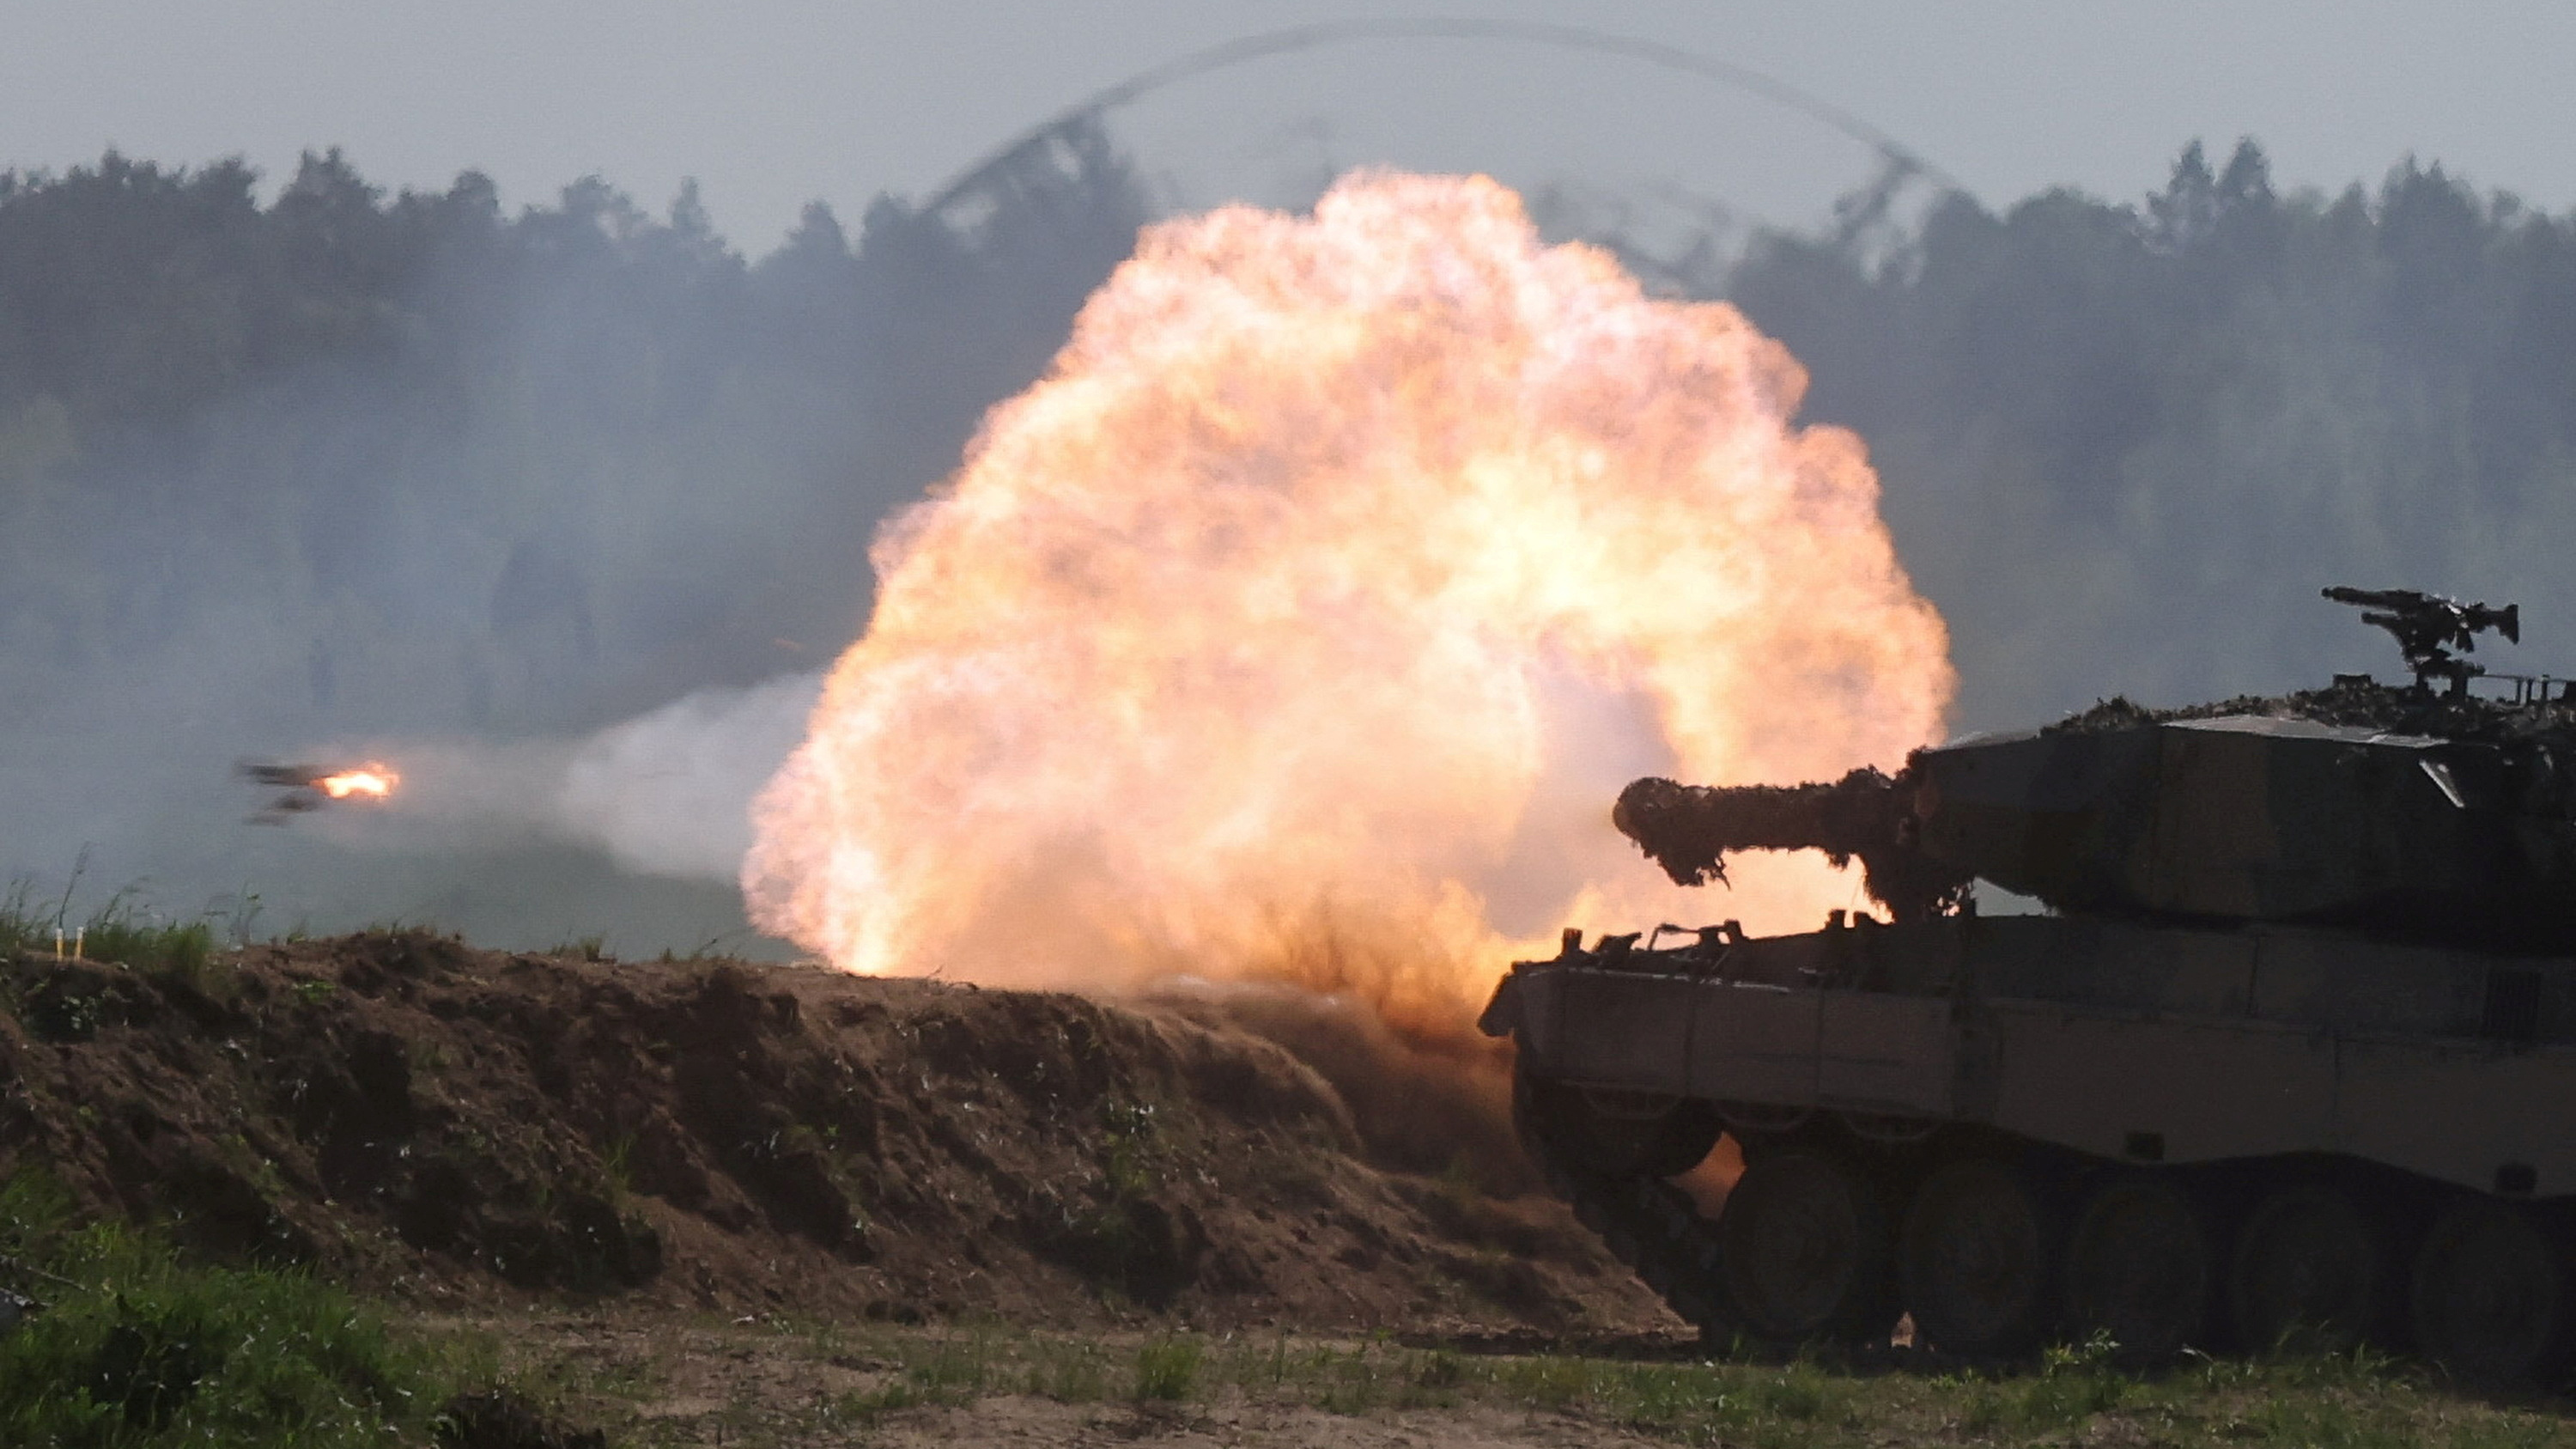 A Polish Leopard 2PL tank fires during Defender Europe 2022 military exercise of NATO troops including French, American, and Polish troops, amid the Russian aggression against Ukraine, at the military range in Bemowo Piskie, near Orzysz, Poland May 24, 2022./REUTERS/Kacper Pempel/File Photo/